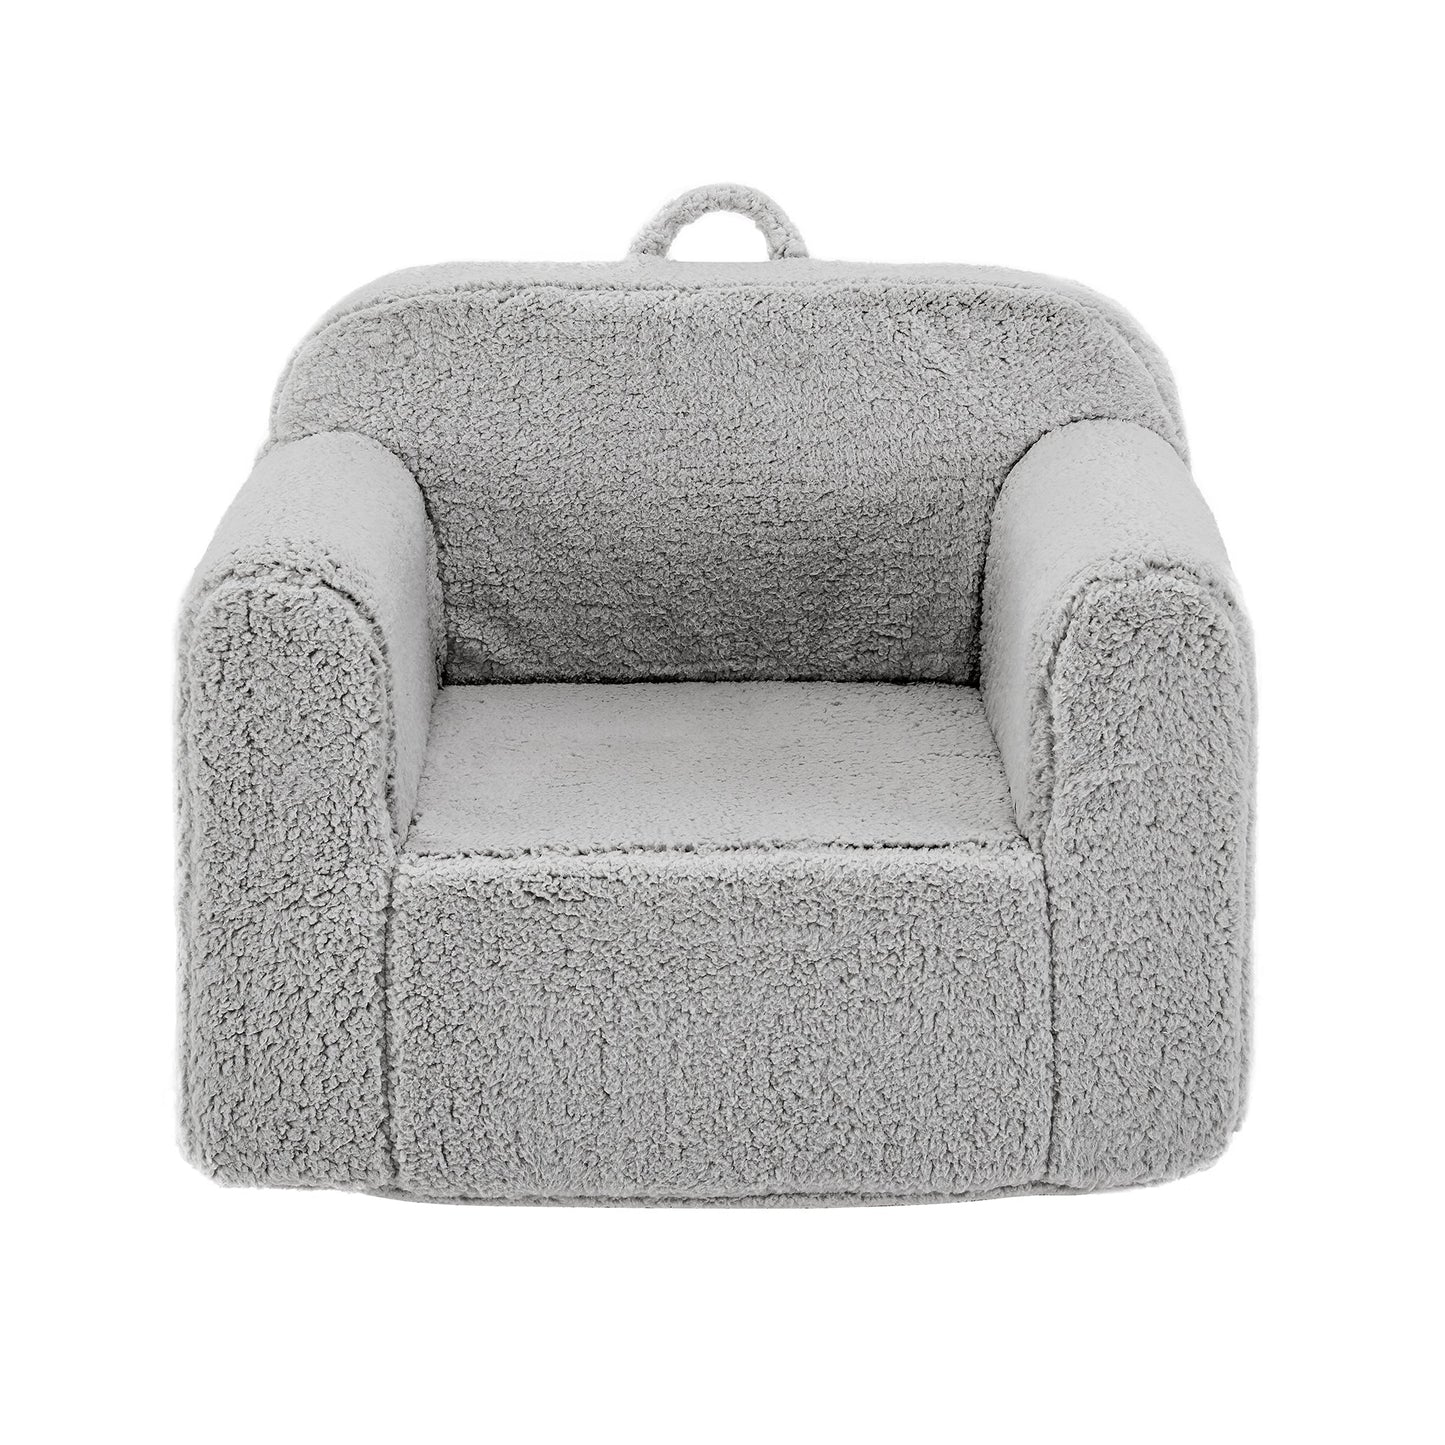 Kids Foam Sofa Chair with Removable Slipcover and Hand for Bedroom or Playroom (Gray)